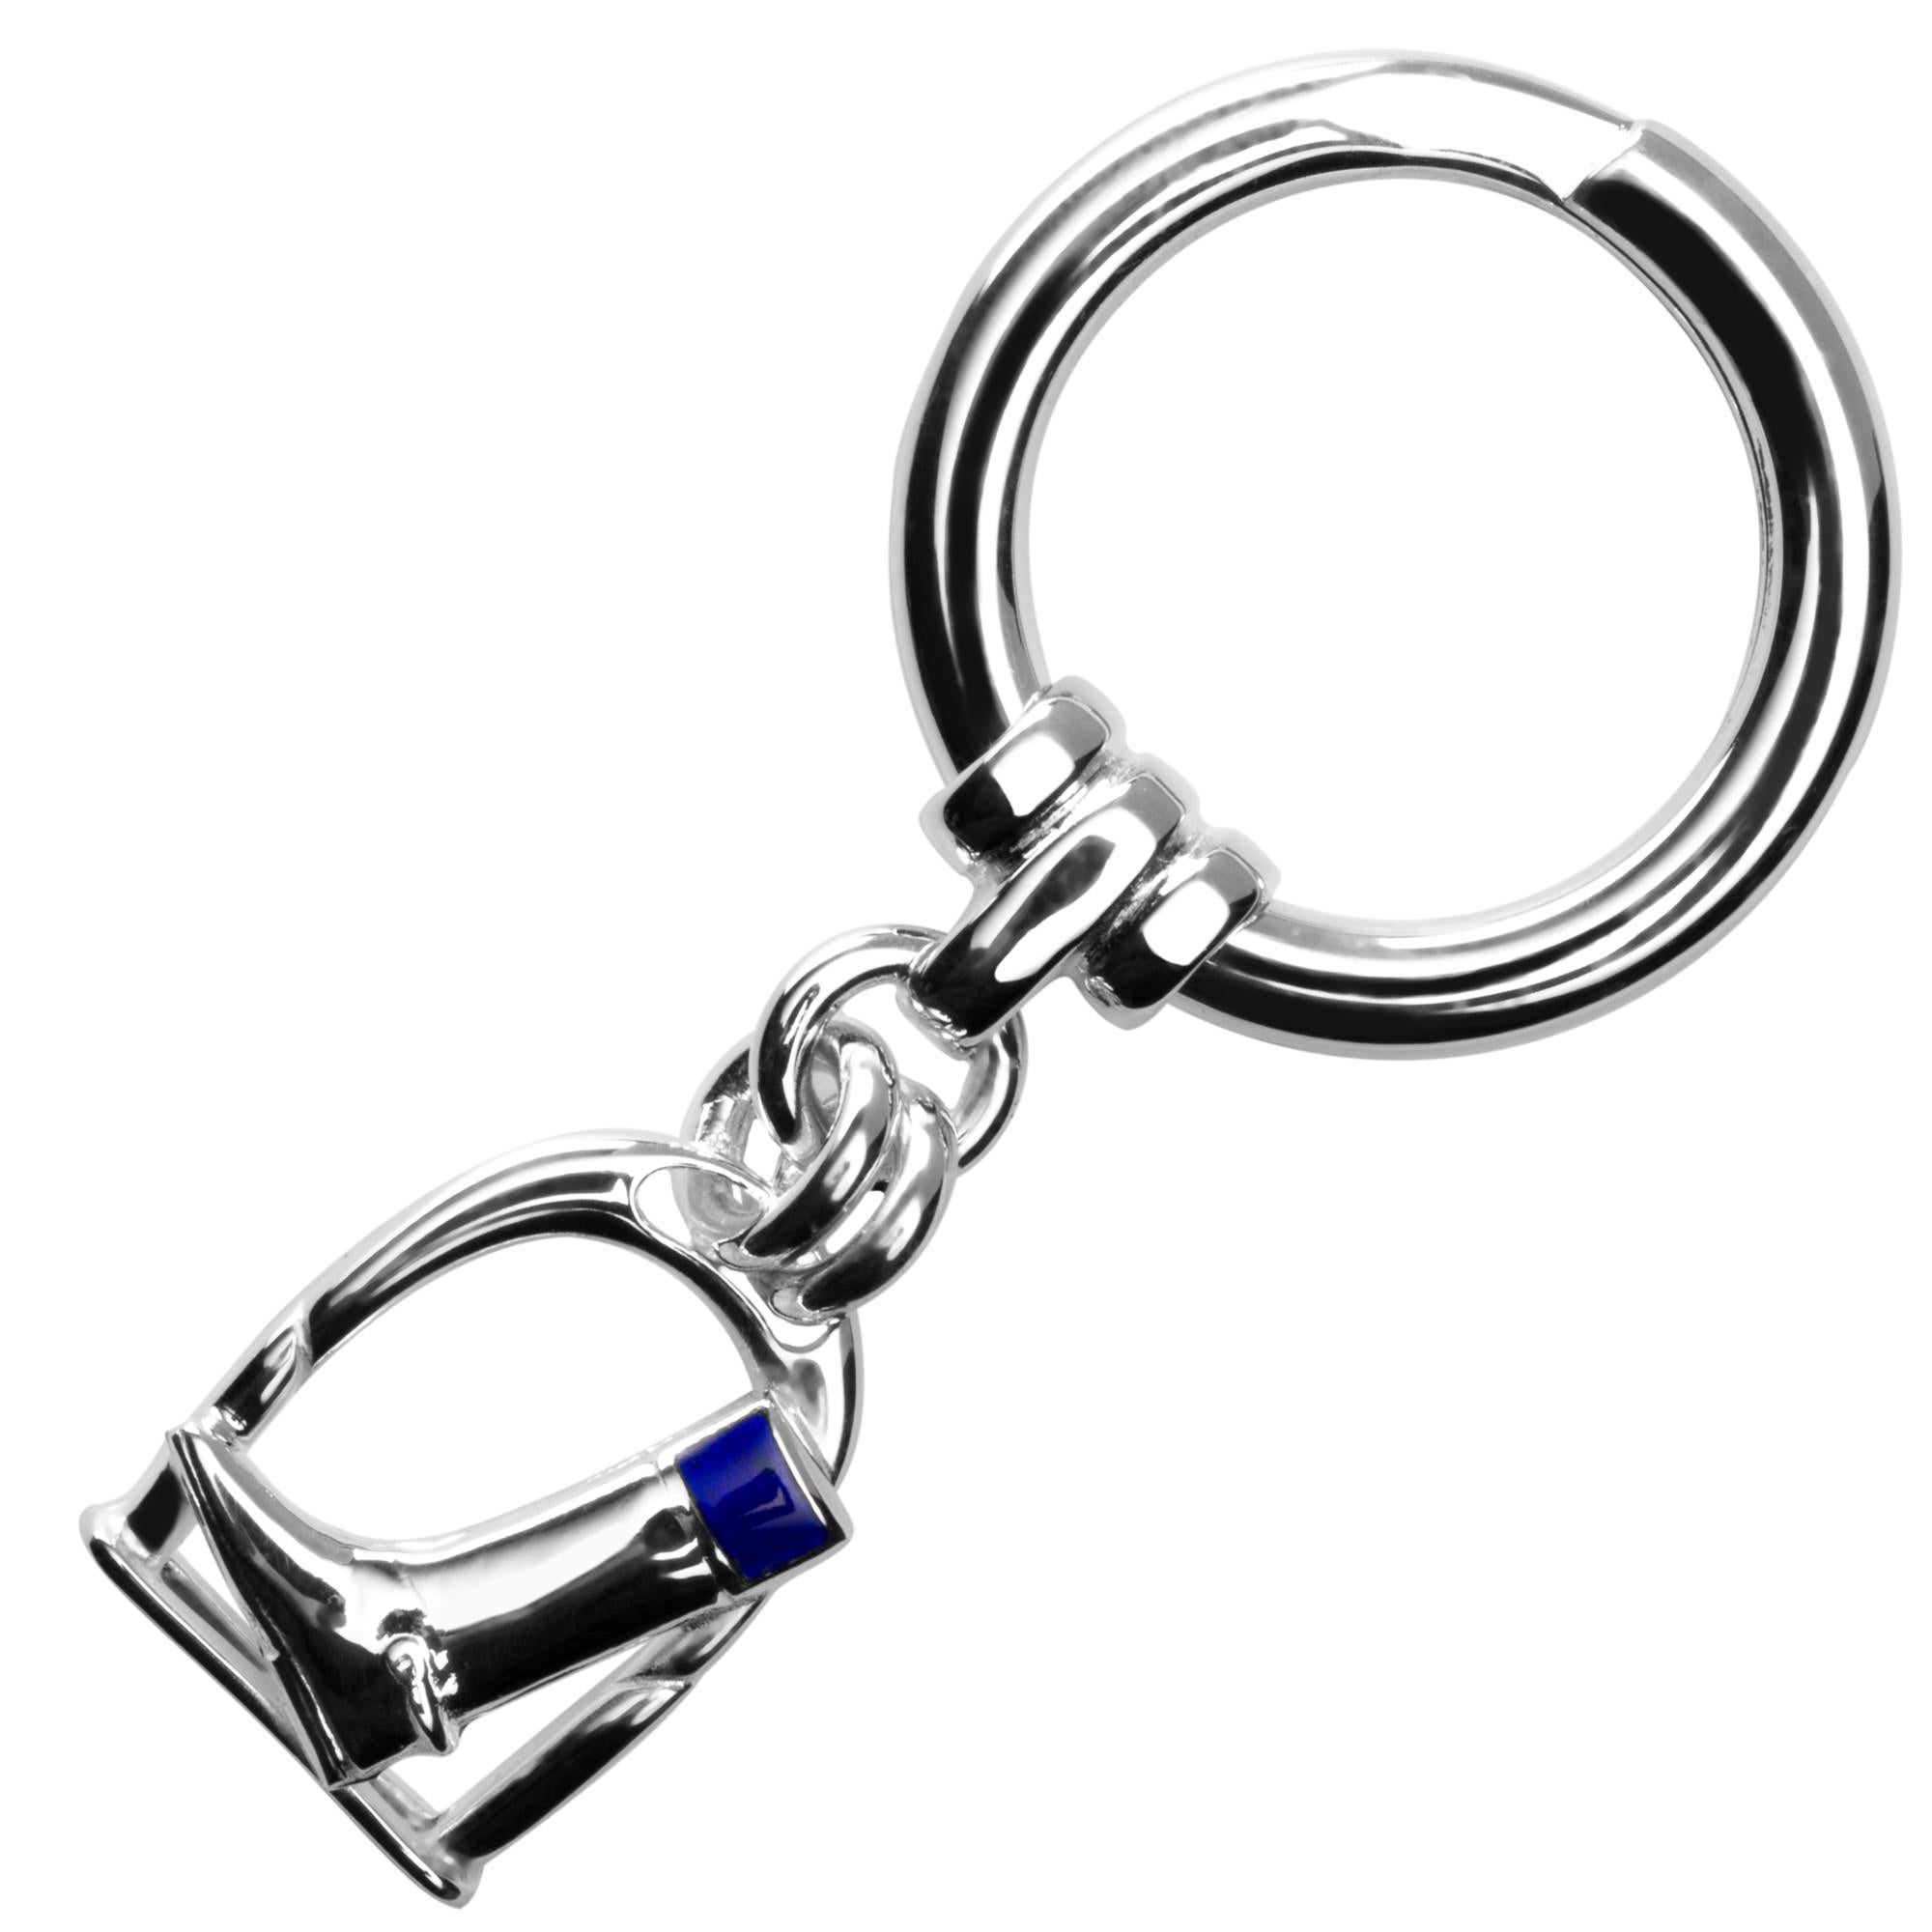 Alex Jona design collection, hand crafted in Italy, rhodium plated sterling silver horseshoe equestrian key holder.
Dimensions : L 2.5 in/ 64.01 mm x W 0.54 in/ 13.85 mm x Depth: 0.06 in/ 1.68 mm.

Alex Jona gifts stand out, not only for their